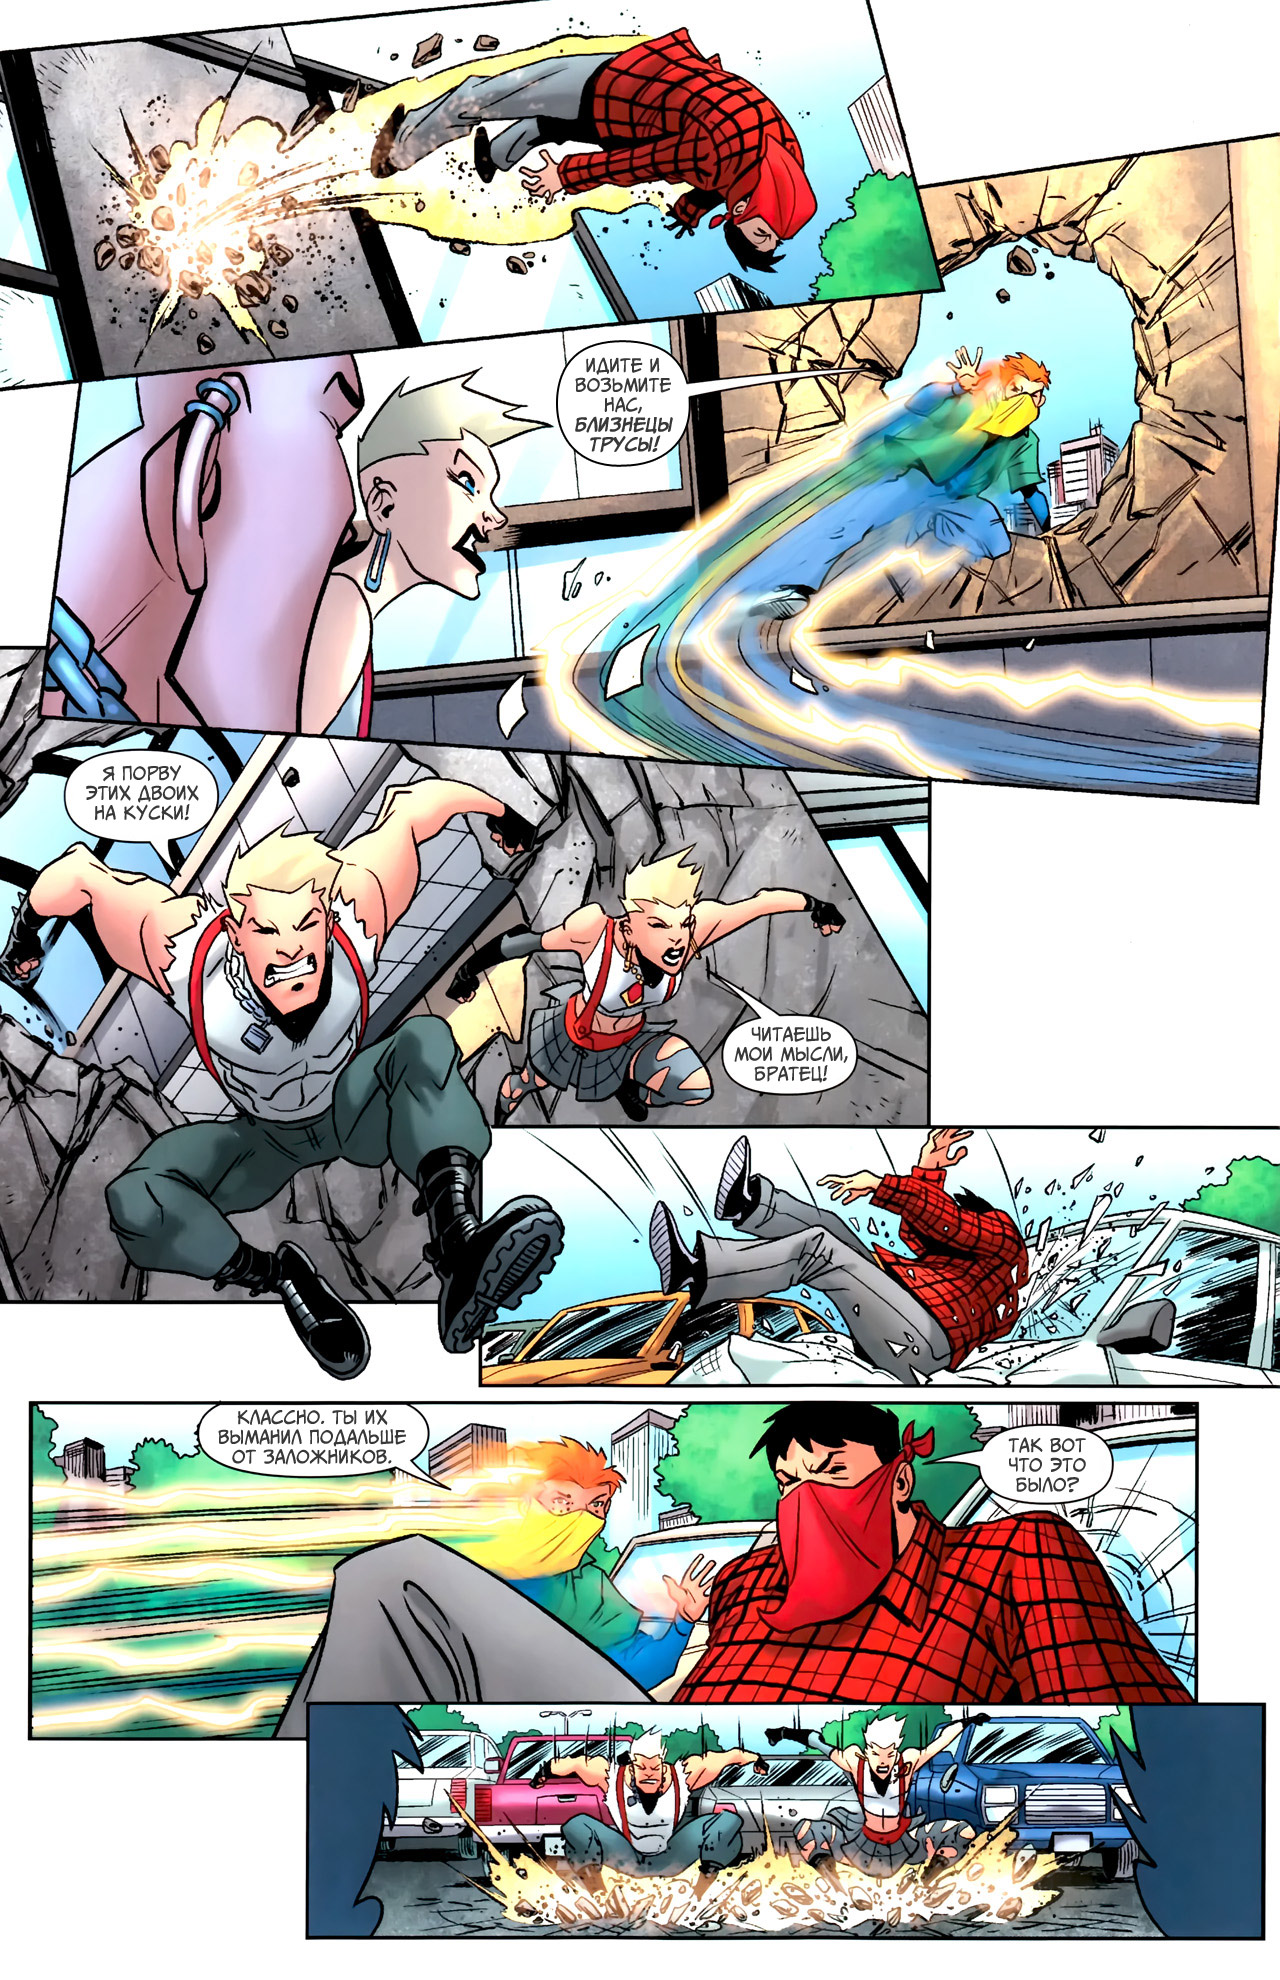 YoungJustice_00_0019.jpg